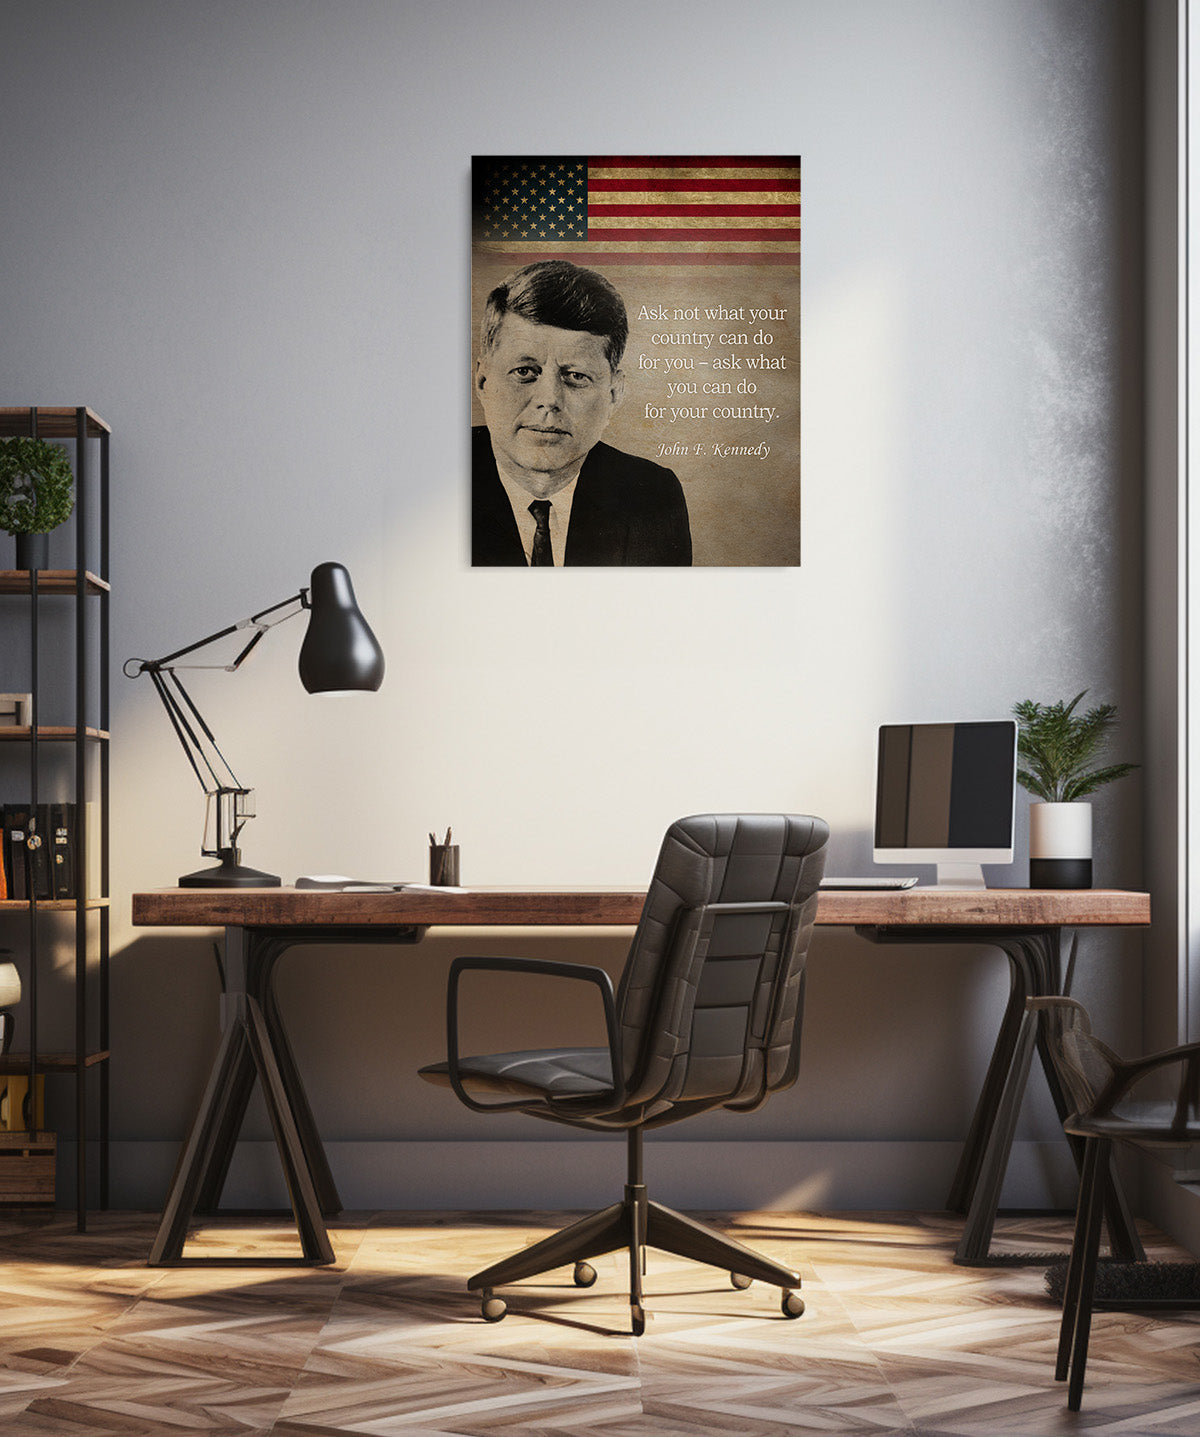 John F. Kennedy Historic Quote - Ask not what your country - Great Inspirational Gift - Motivational Print - American Patriotic President